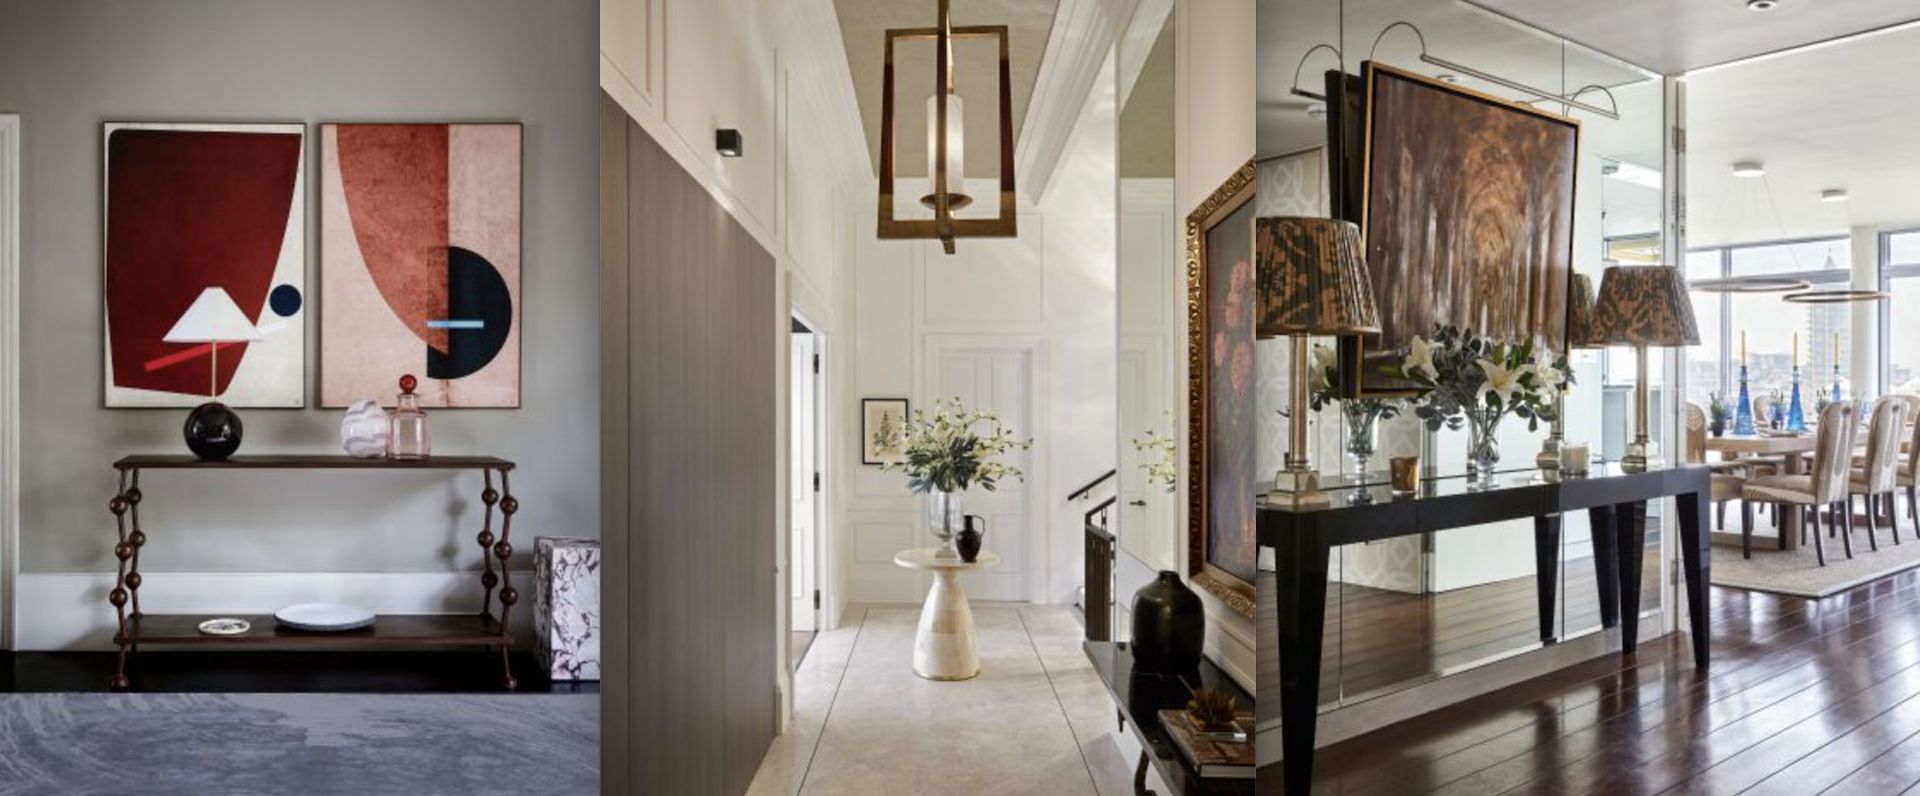 Entryway ideas for apartments: 10 ways to max a small space